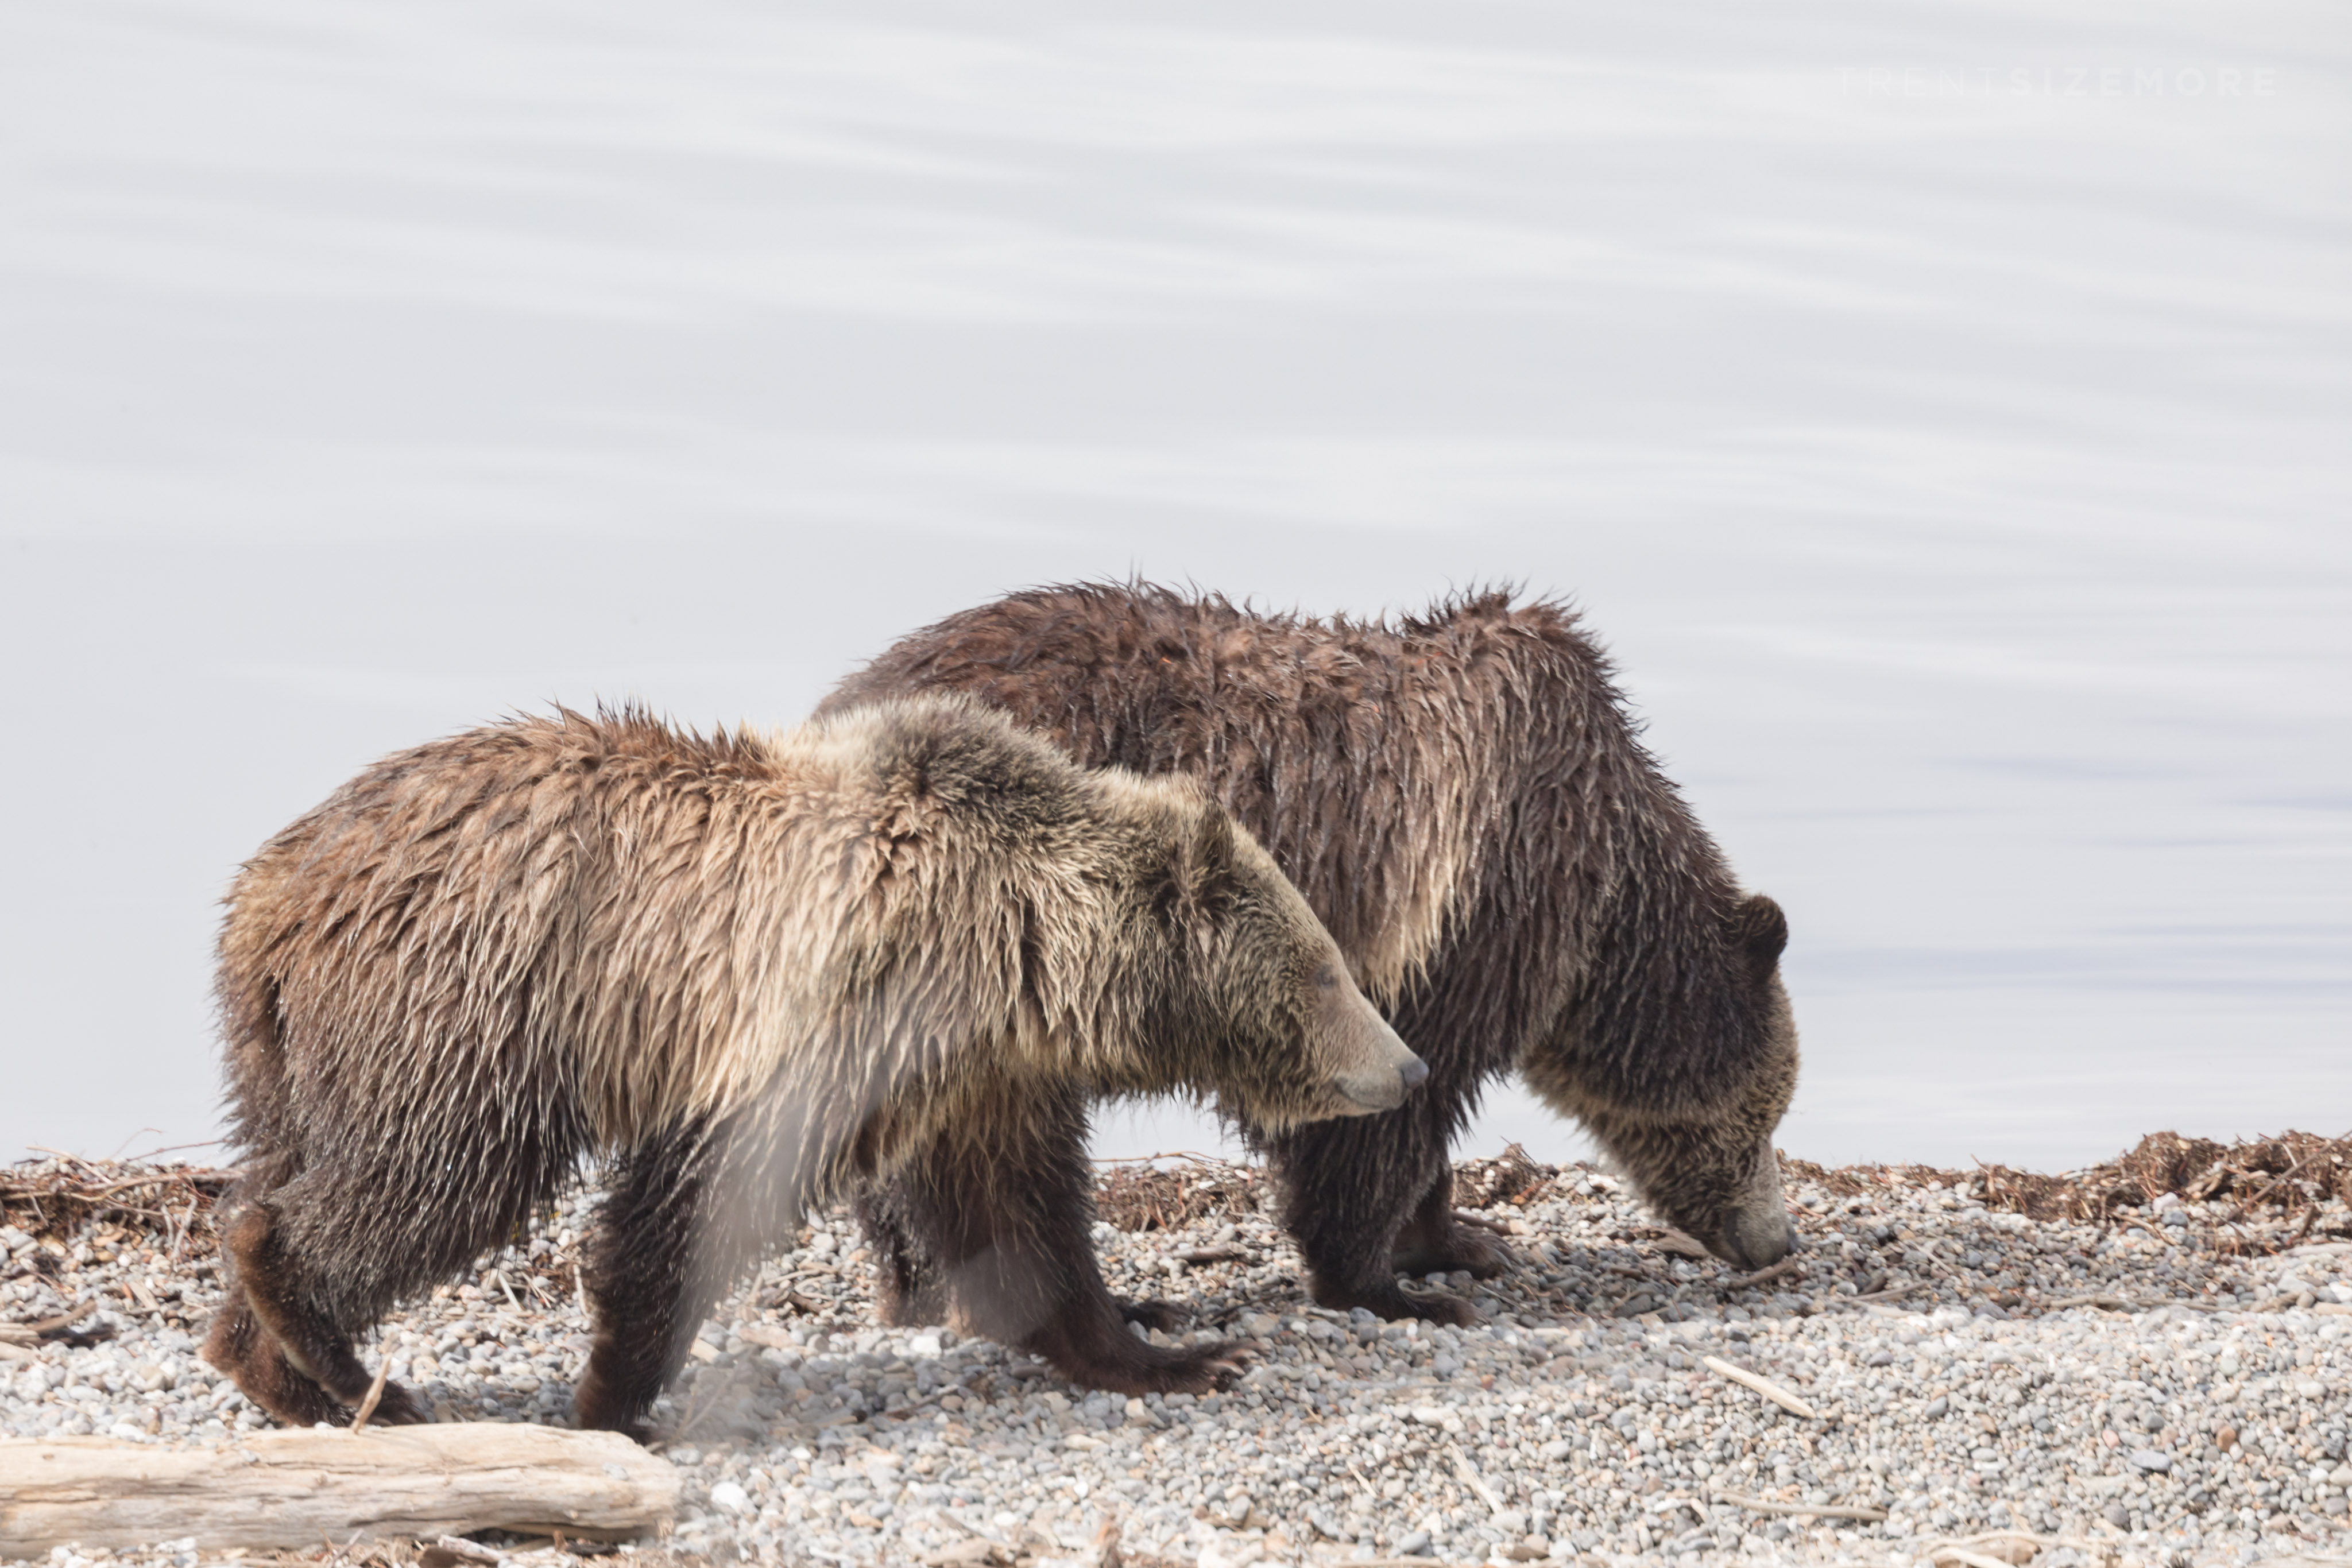 How to Find and Photograph Bears in Yellowstone